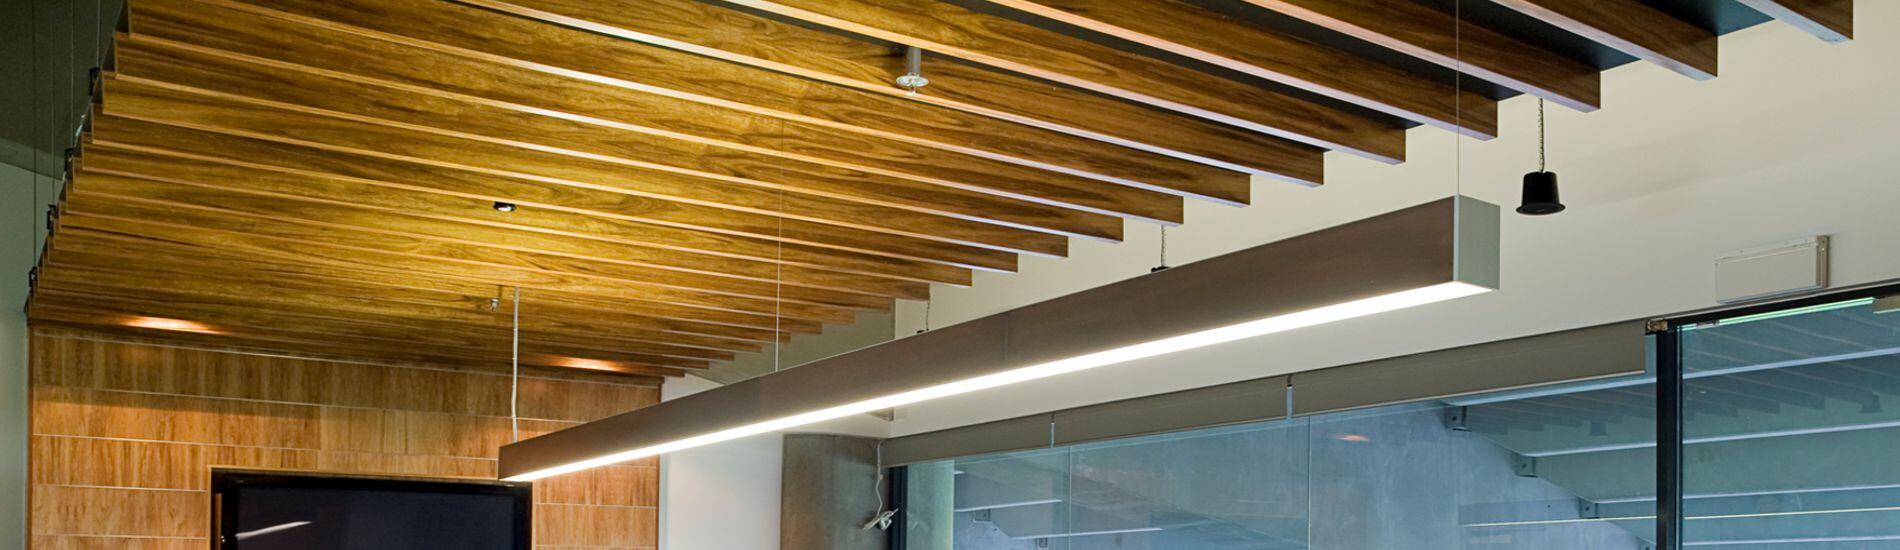 Aesthetic use of lightweight MAXI BEAM in stadium office fit-out